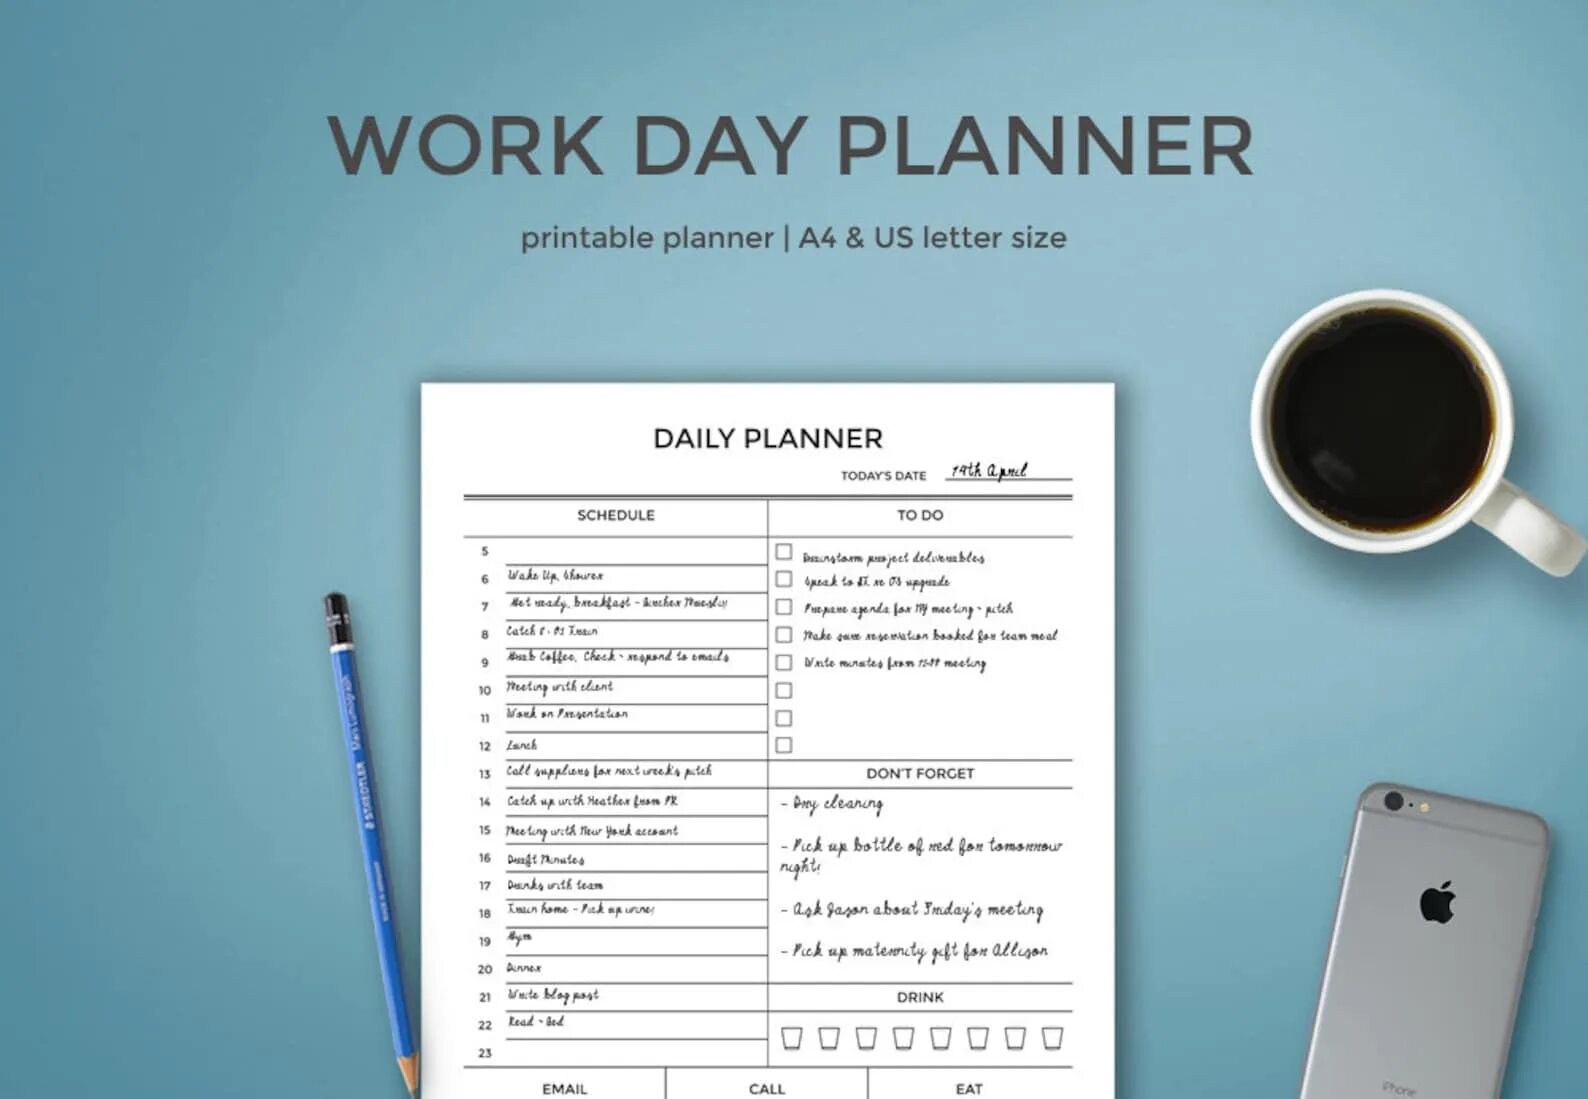 Daily plans. Daily Planner. Plan for the Day. Working Day Plan. Planner for Day.